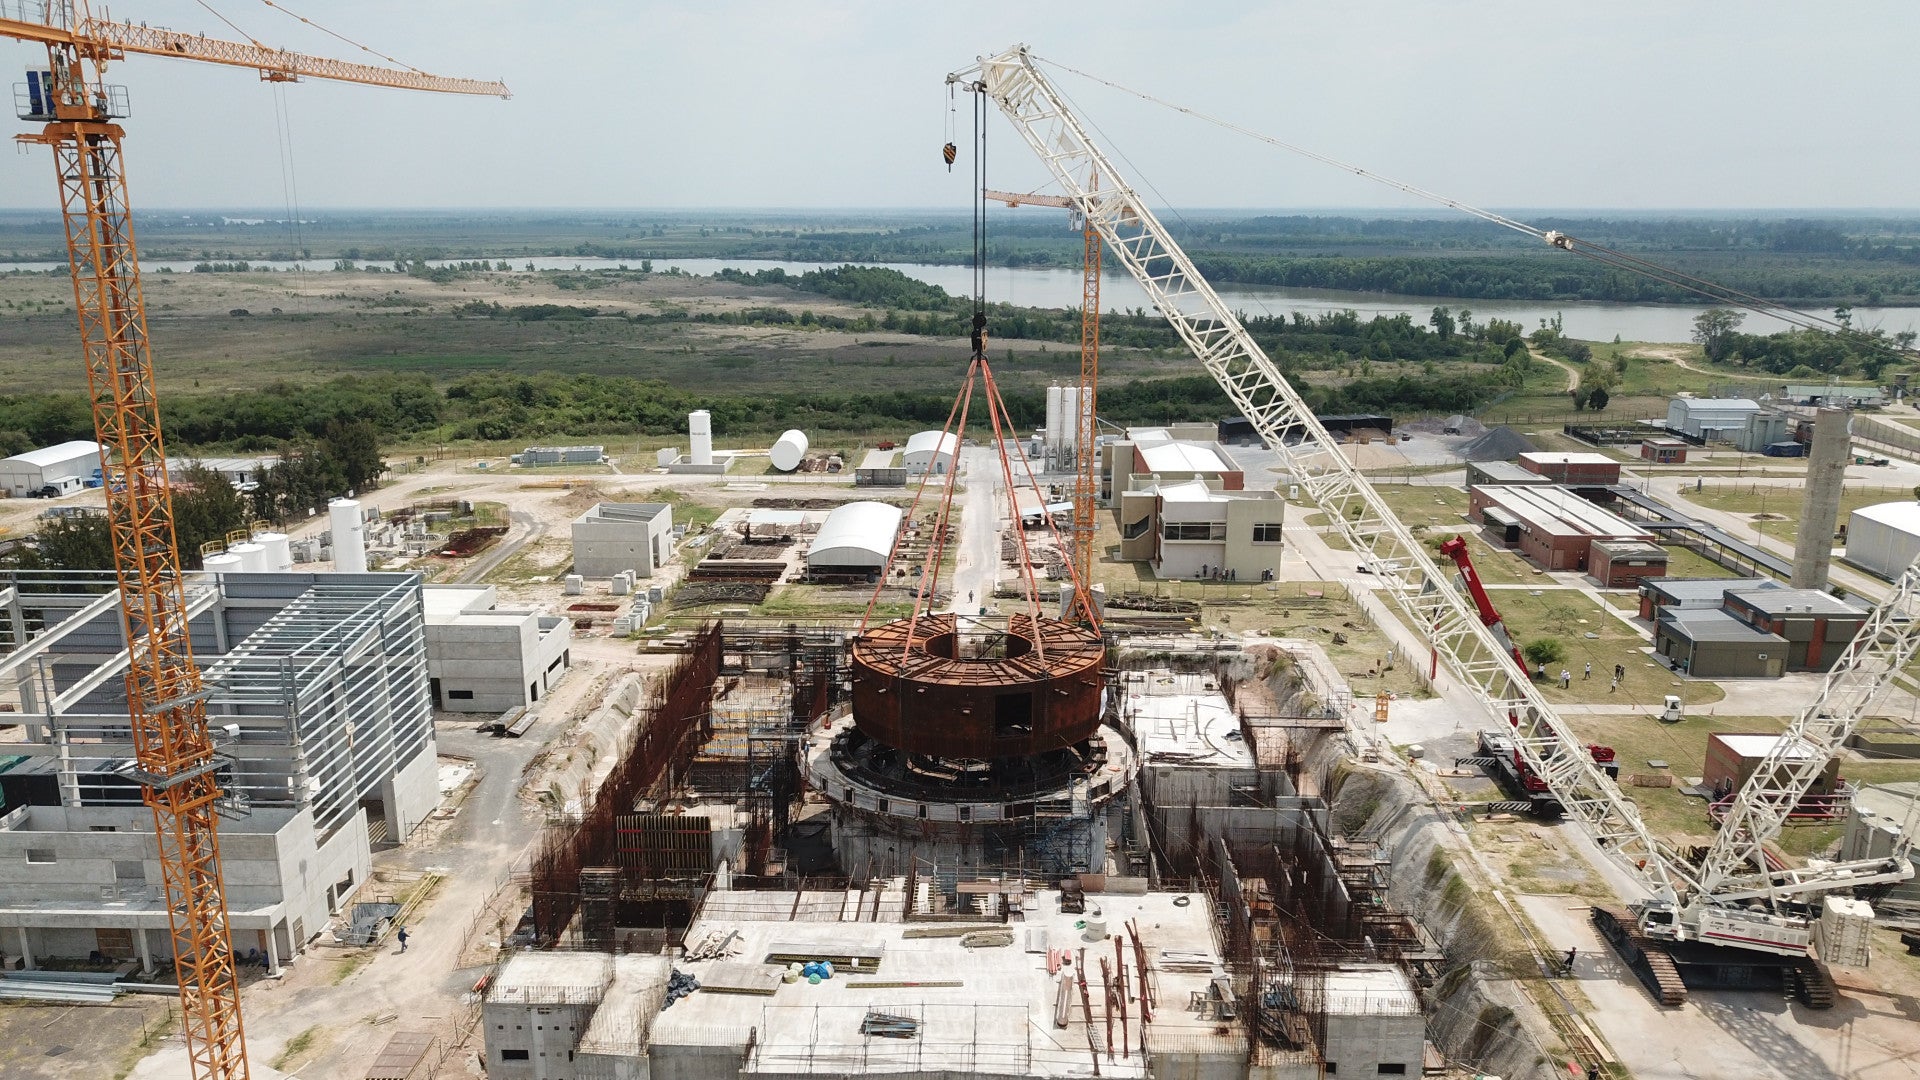 Where will the first small modular nuclear reactors be?